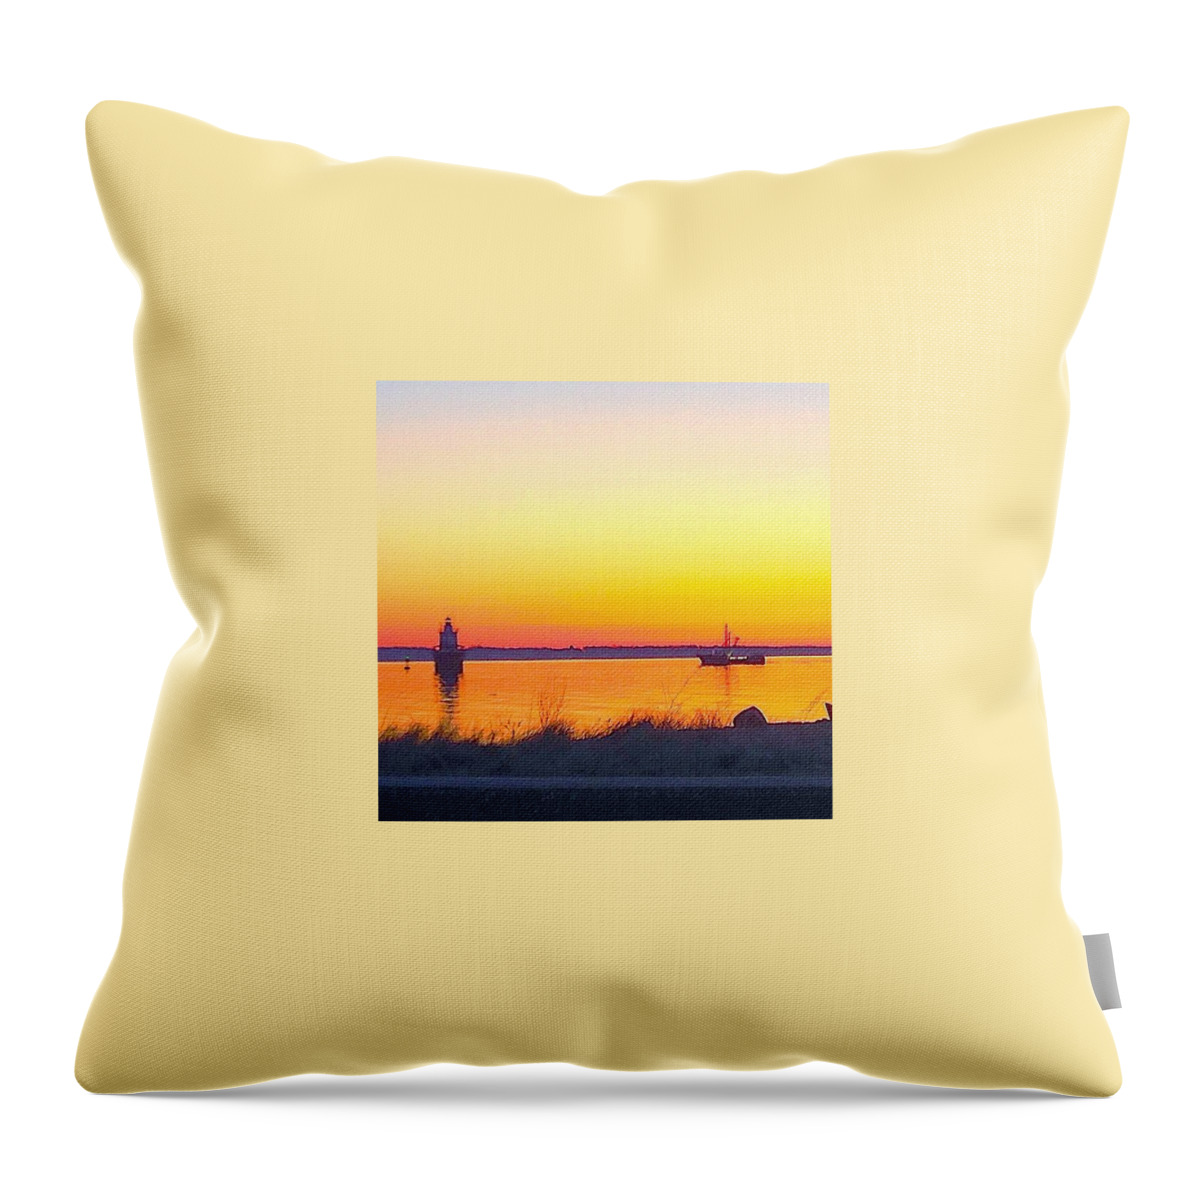 New England Throw Pillow featuring the photograph A Bright New England Morning by Kate Arsenault 